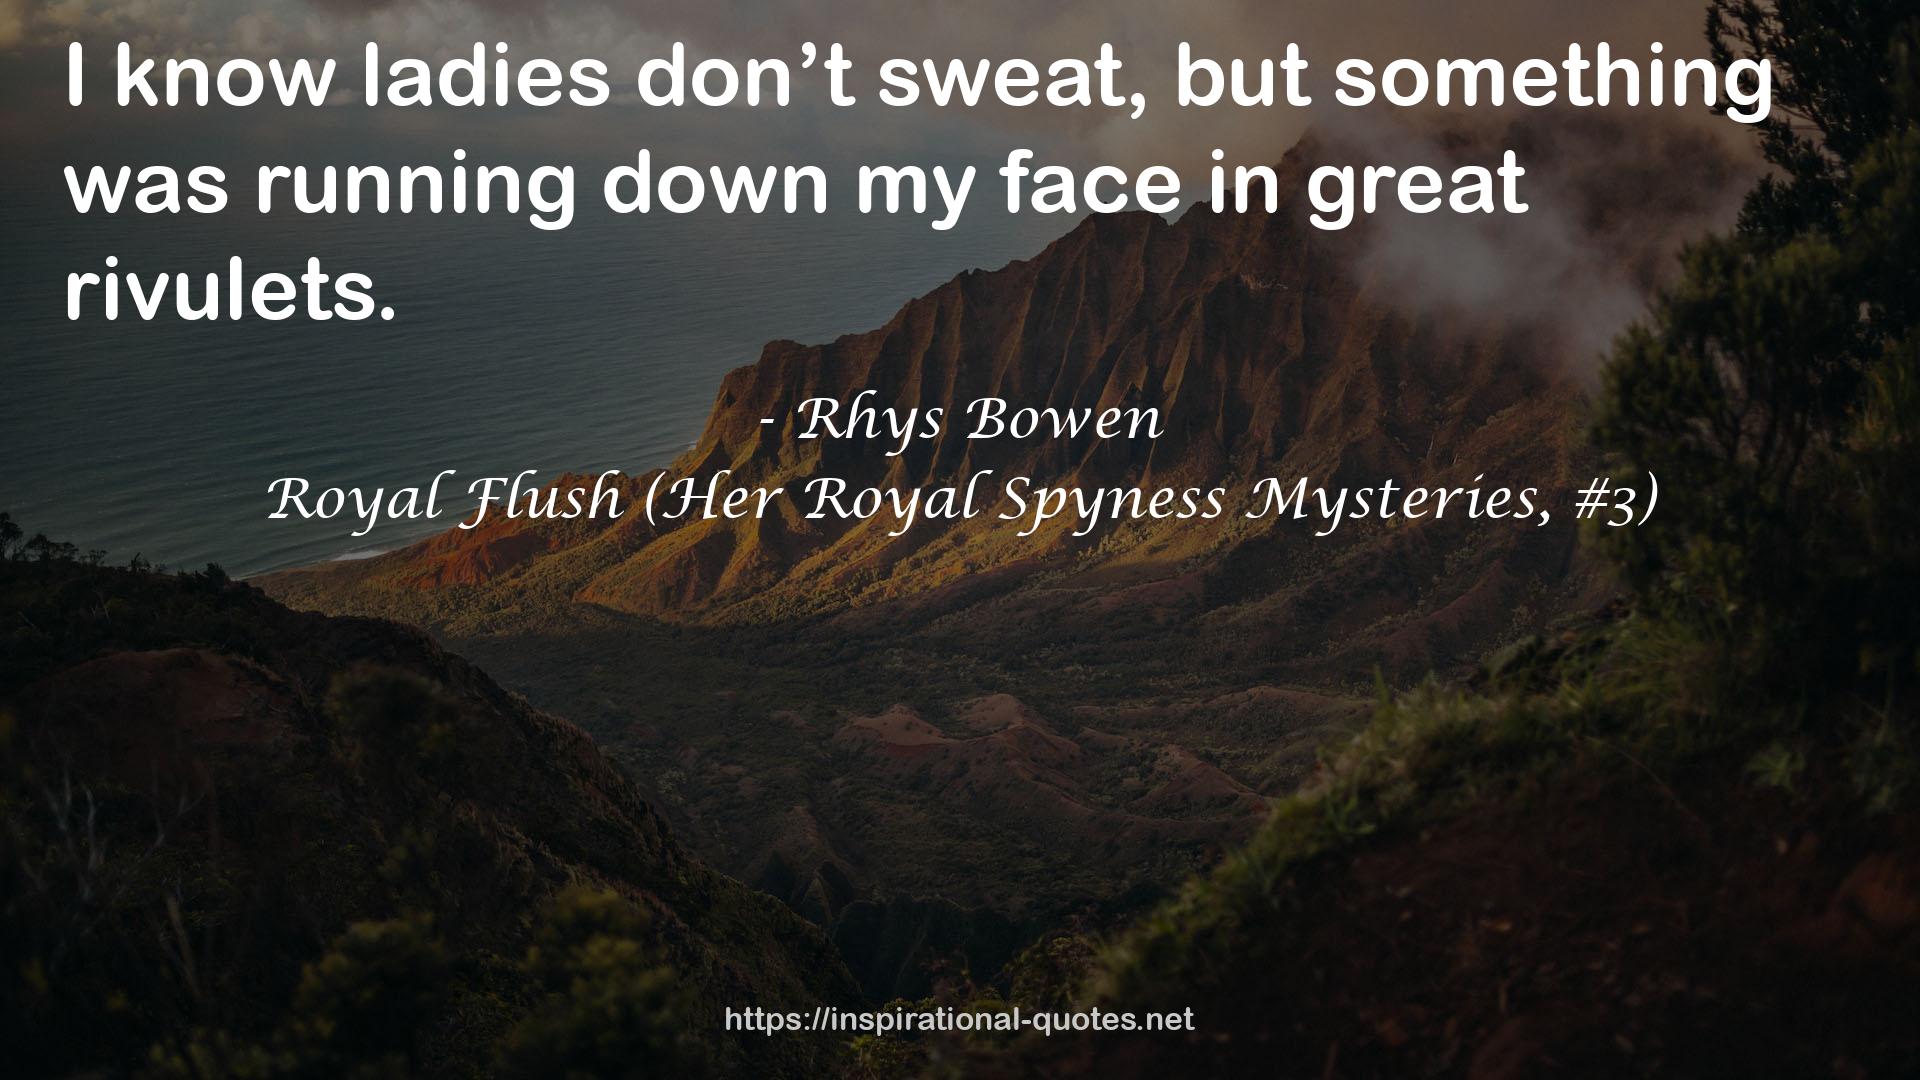 Royal Flush (Her Royal Spyness Mysteries, #3) QUOTES